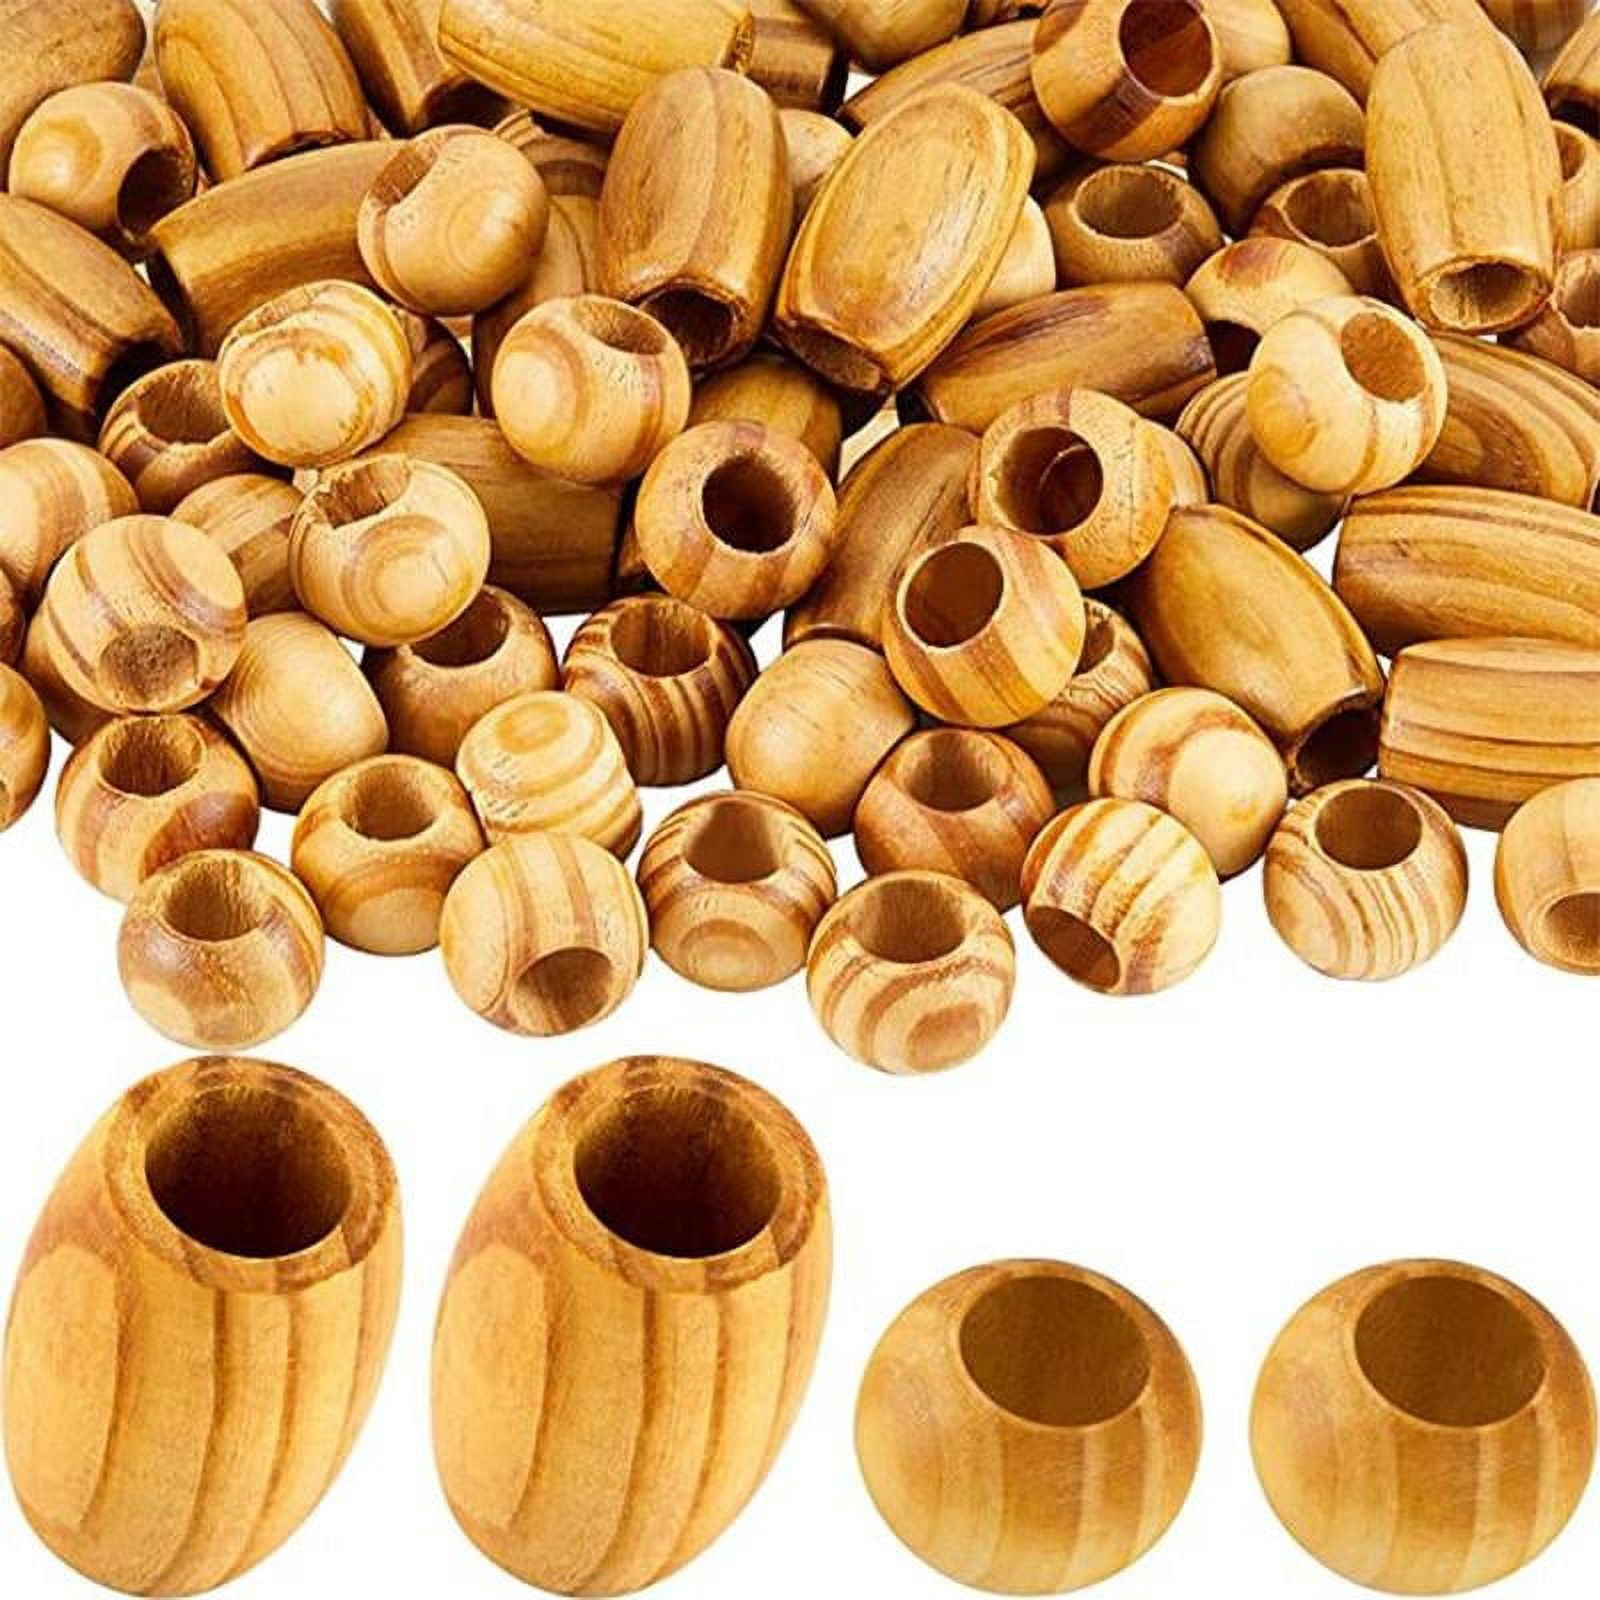 450 10mm Wood Beads for Craft/ Christmas Decor Red, Green and White Painted Wooden  Beads Hole 3mm, Loose Spacer Beading Supplies for Jewelry Making/ DIY  Handmade Crafts 